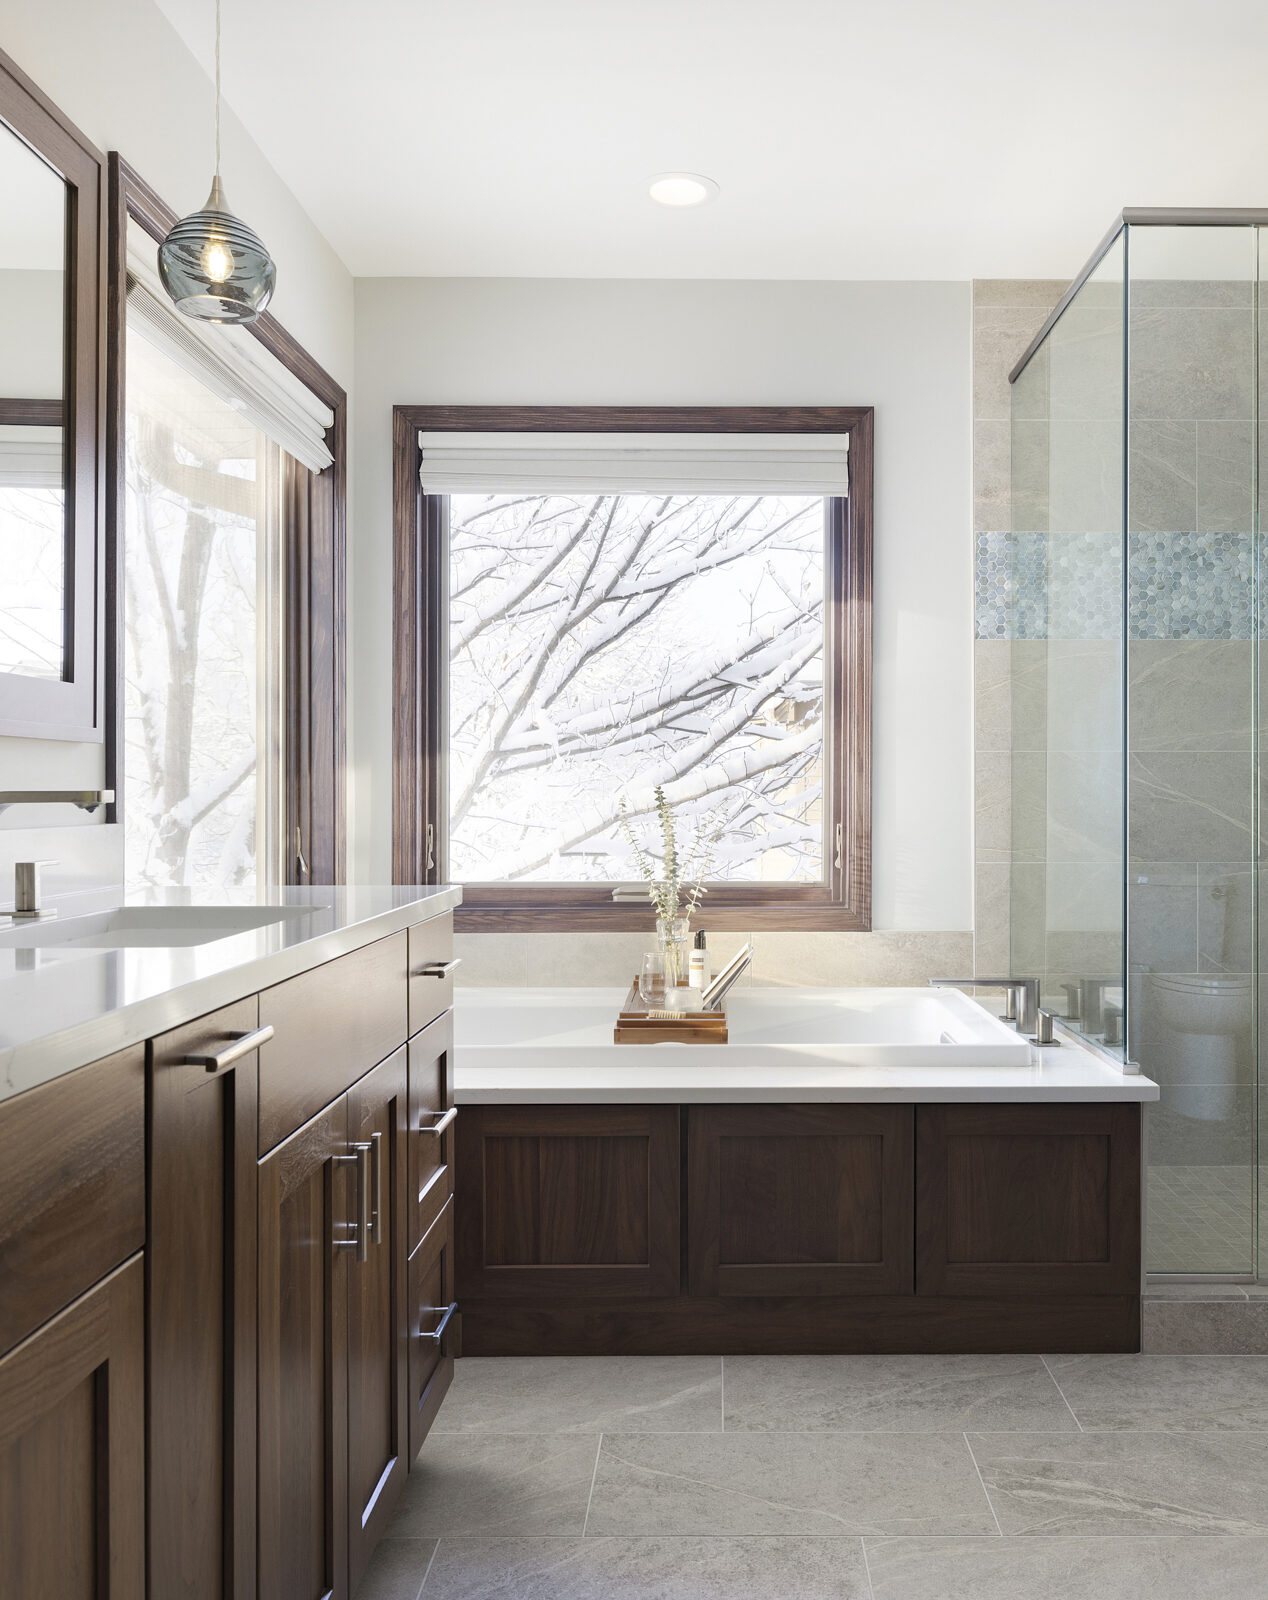 Primary bathroom remodel with dark wood cabinet and trim and large bathtub under windows and glass-enclosed shower